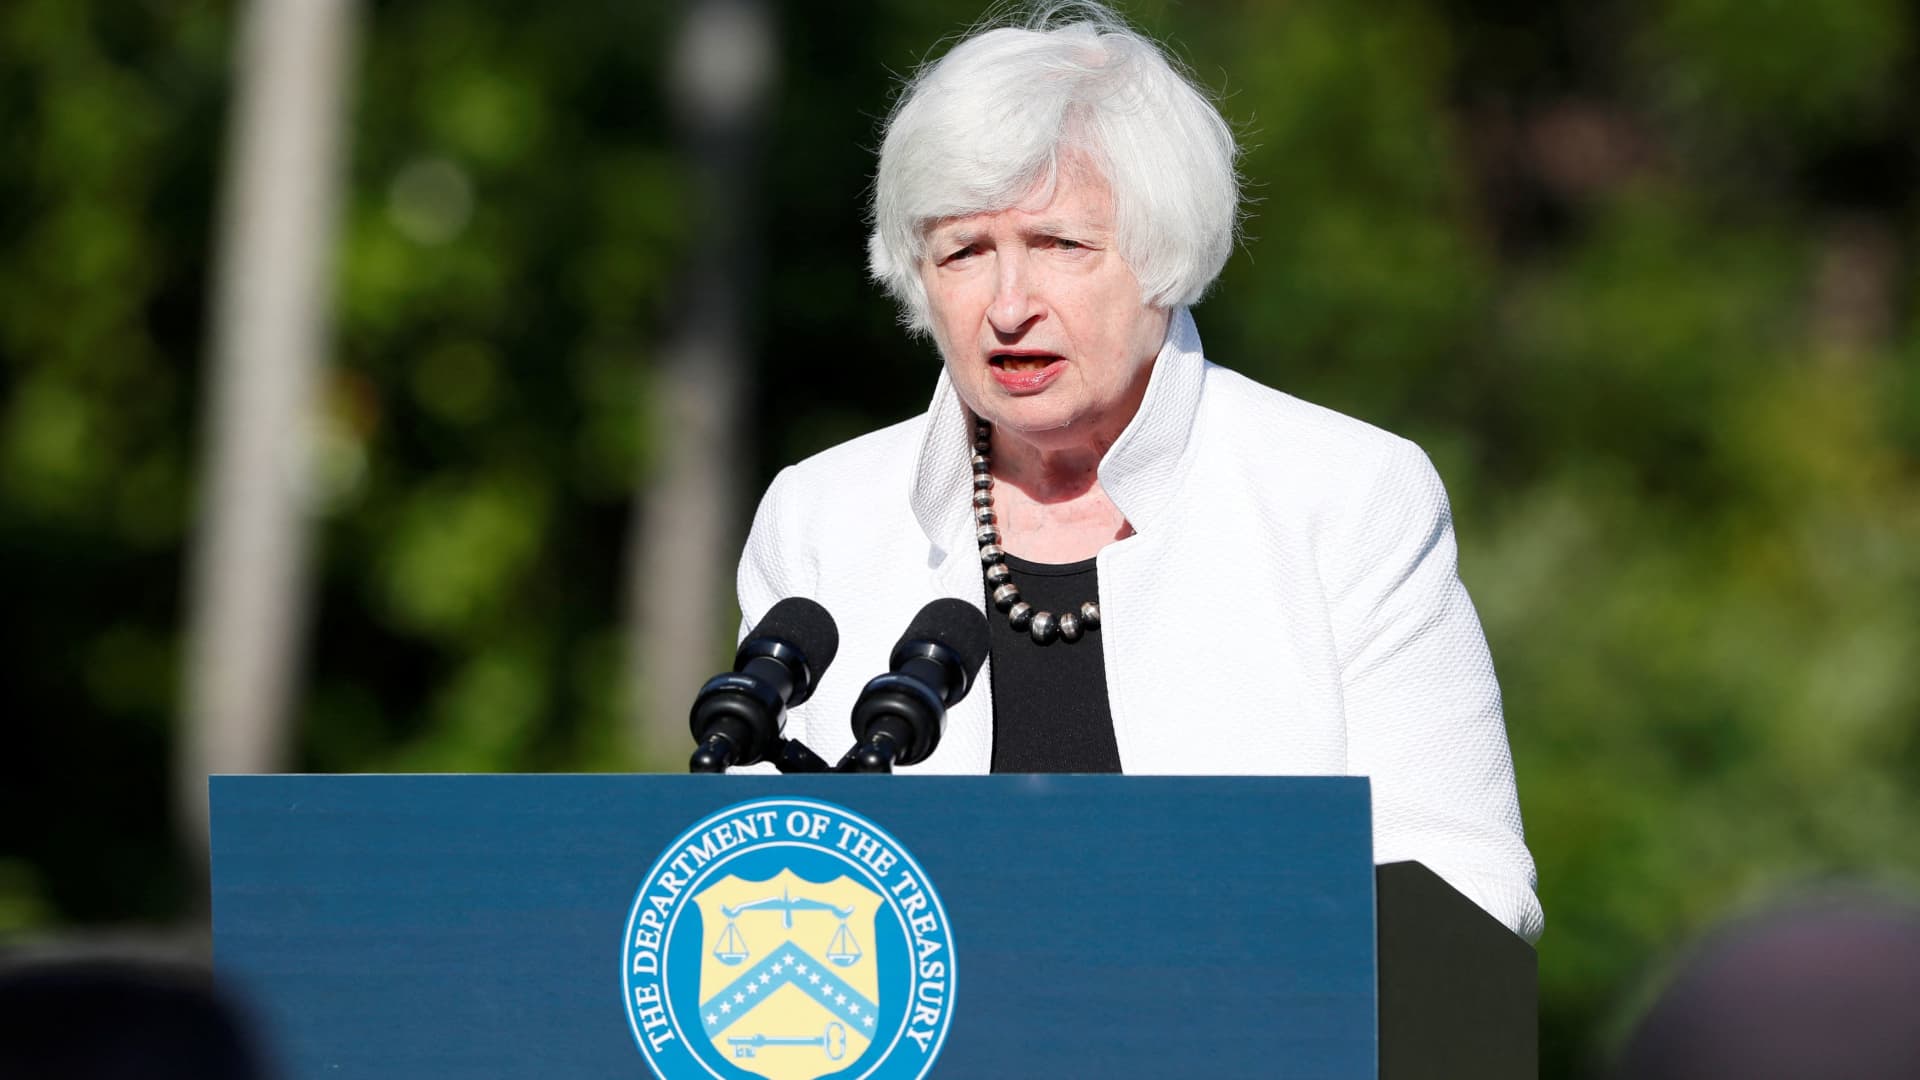 Treasury Secretary Janet Yellen speaking at a news conference on July 14.